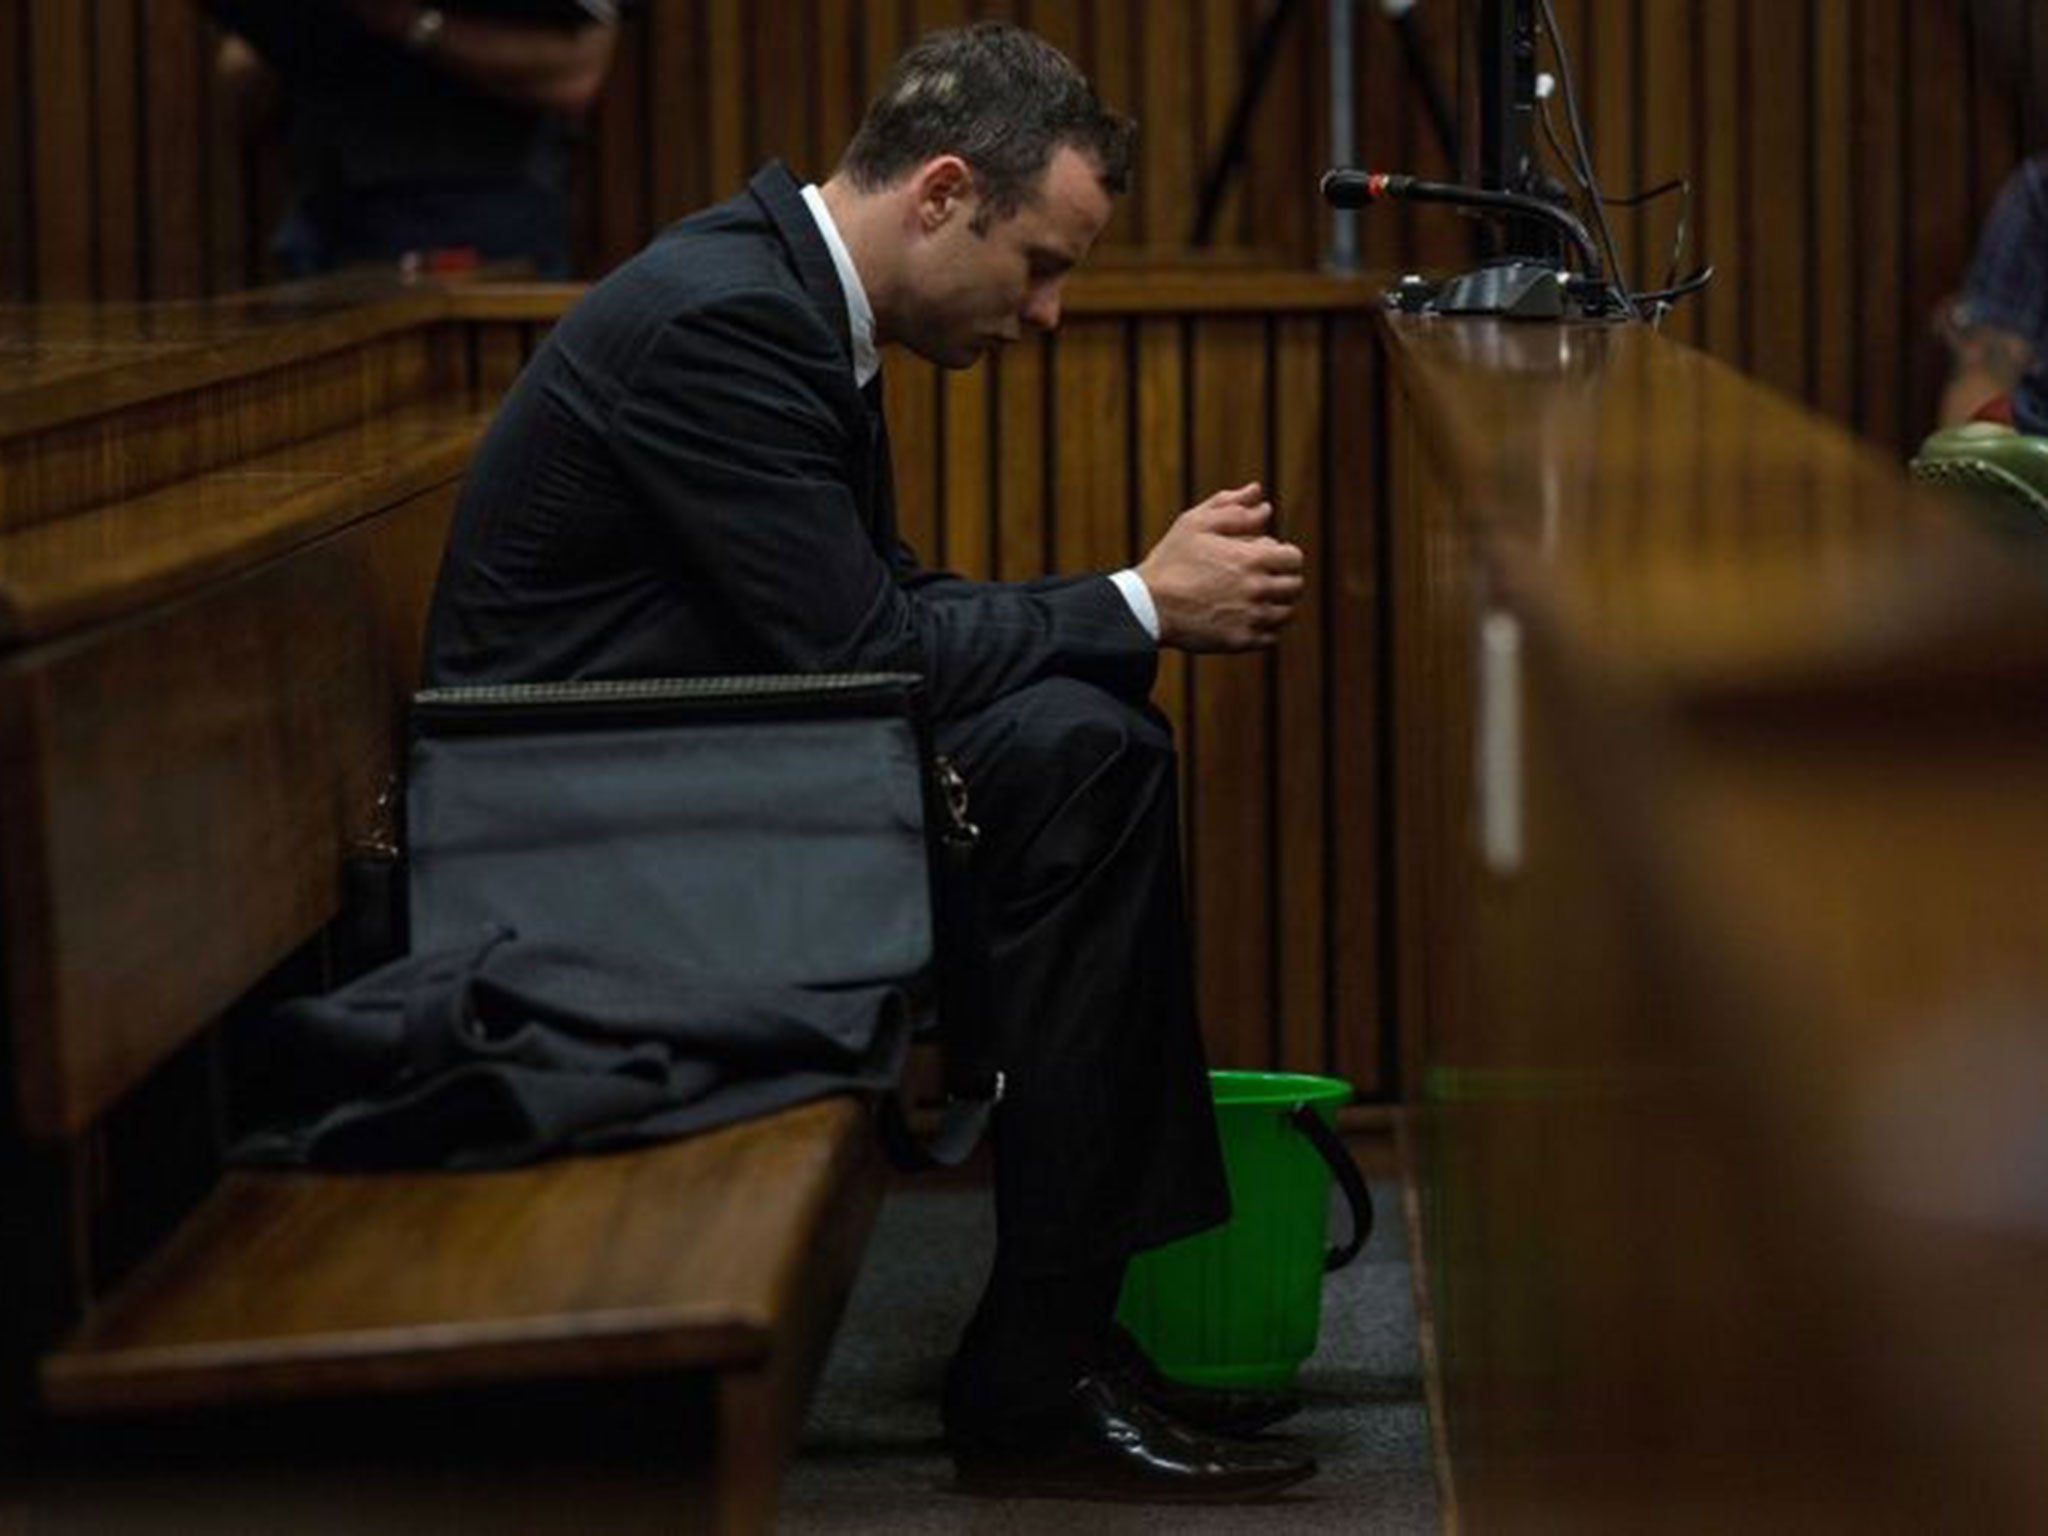 South African Paralympic athlete Oscar Pistorius in court today